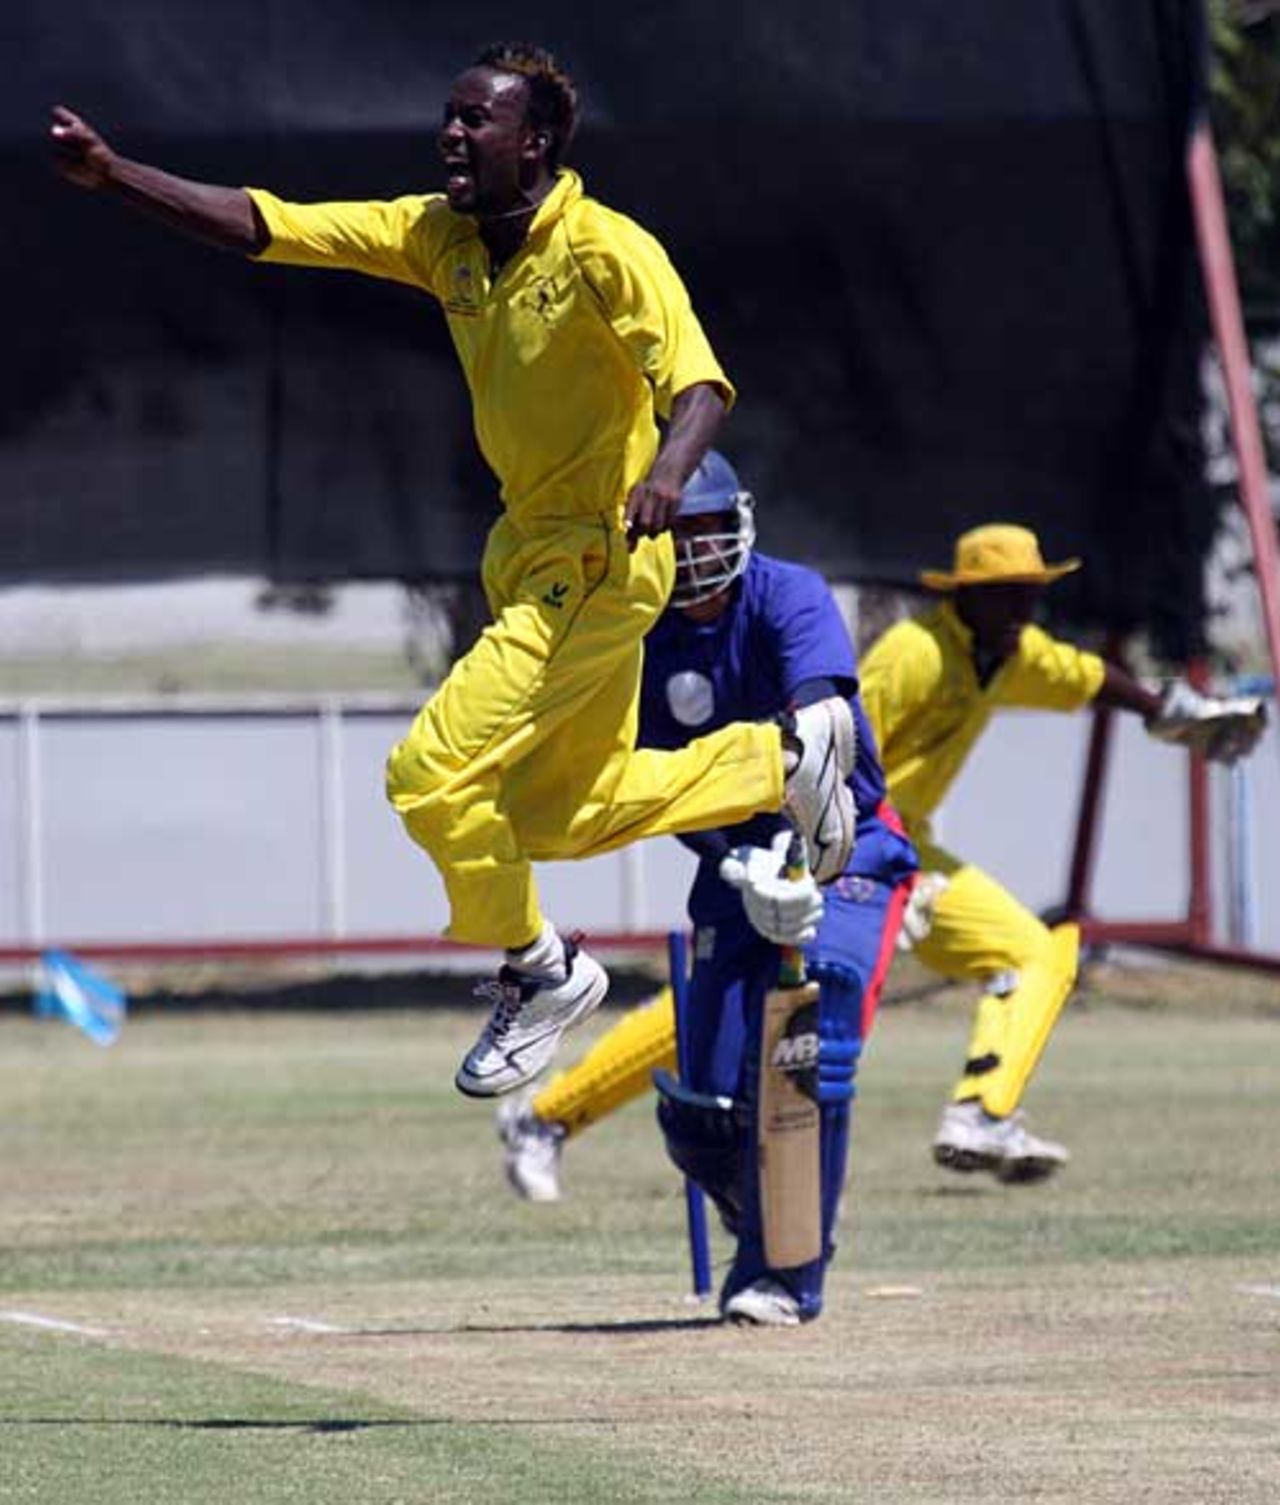 Kenneth Kamyuka jumps for joy as he collects one of his five wickets, Uganda v Afghanistan, Buenos Aires, January 24, 2009